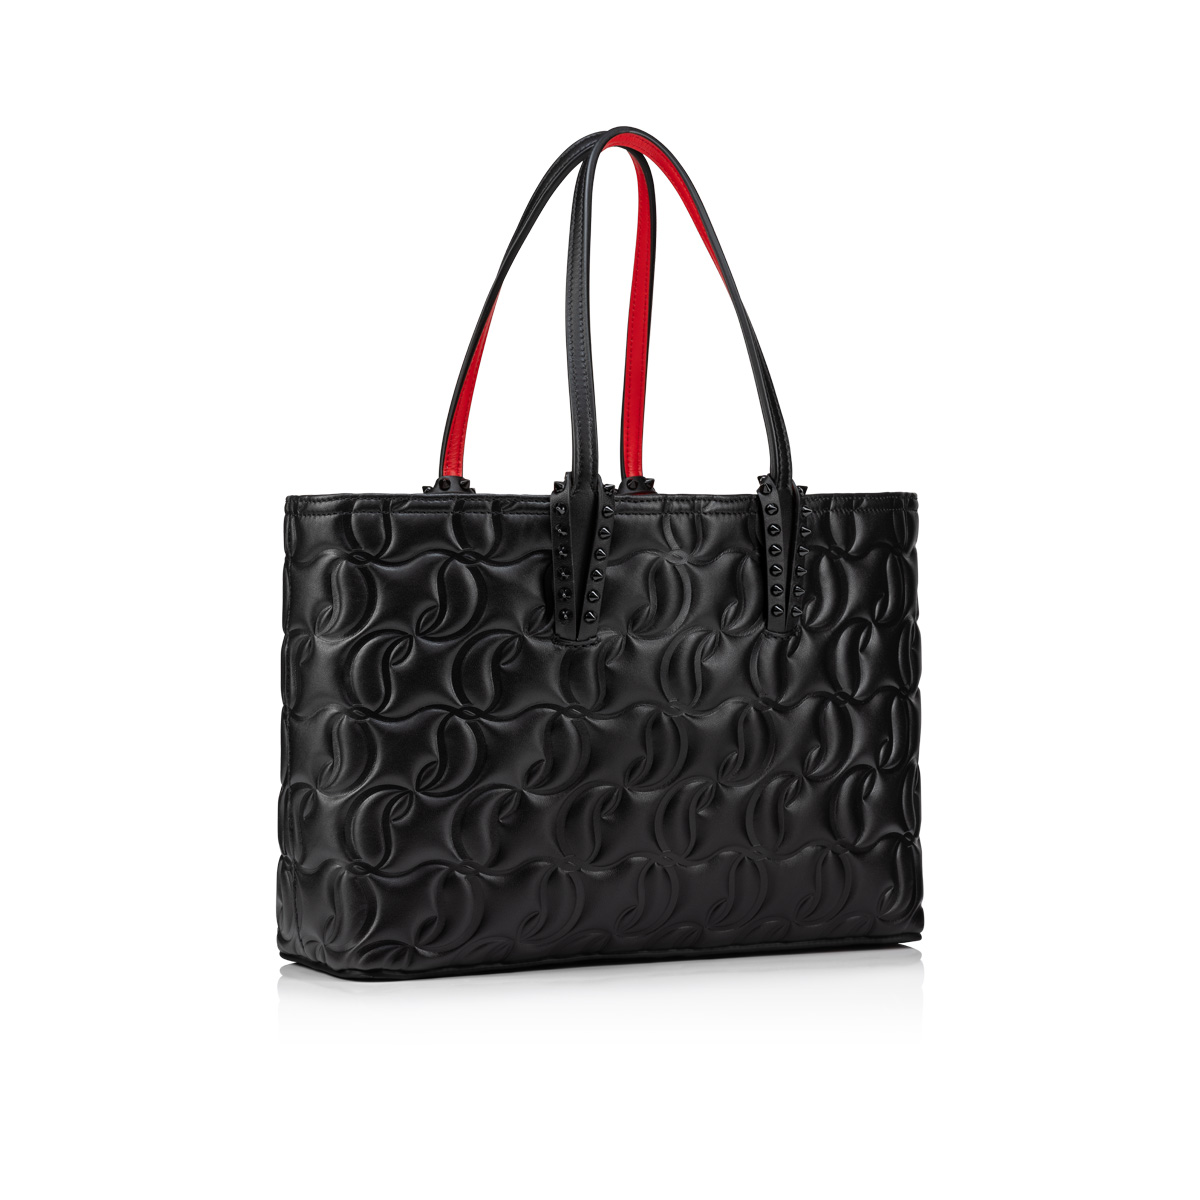 CHRISTIAN LOUBOUTIN Cabata small embellished textured-leather tote |  NET-A-PORTER